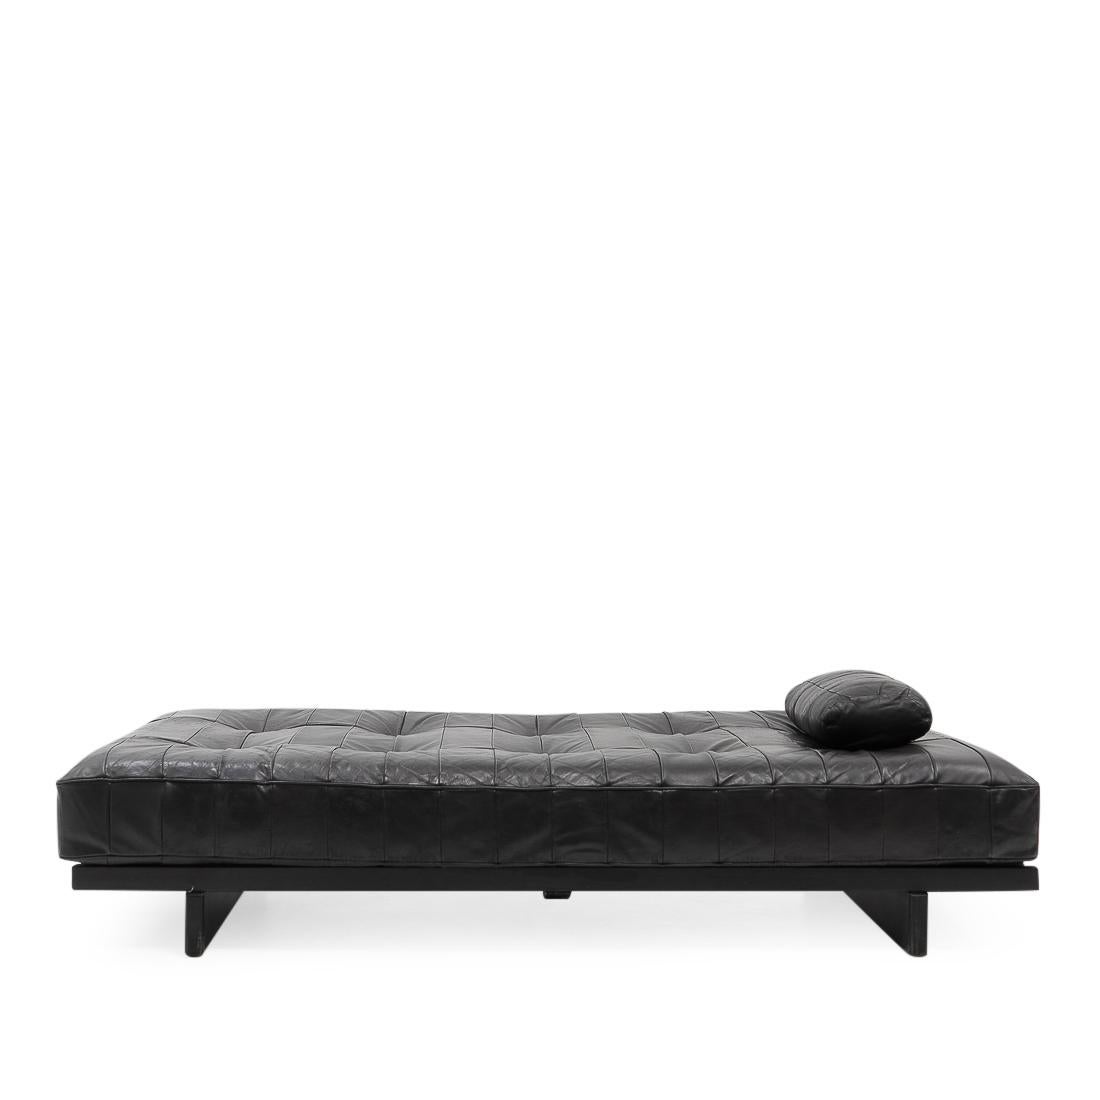 De Sede Daybed model DS-80 in beautifully patinated leather, featuring one pillow. 

The leather is a patchwork design made from black pigmented aniline leather, which typically gives a very “lived” look due to the open nature of the material. The